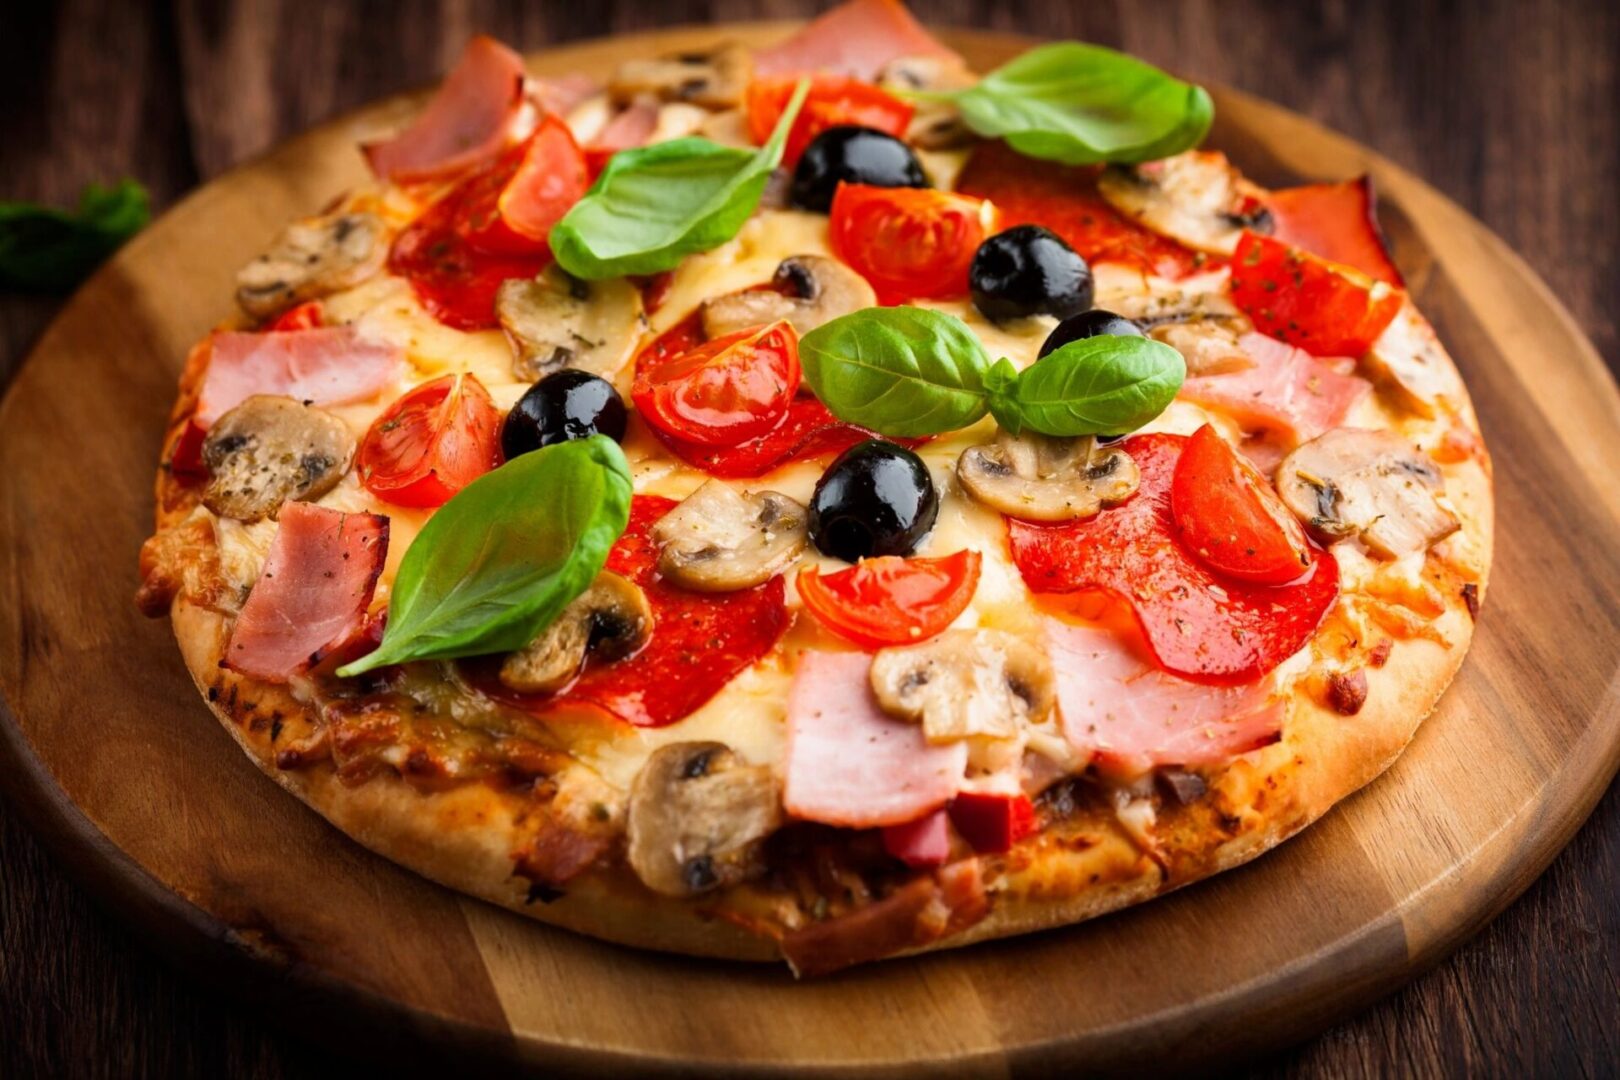 A delicious pizza topped with tomatoes, mushrooms, olives, and basil.